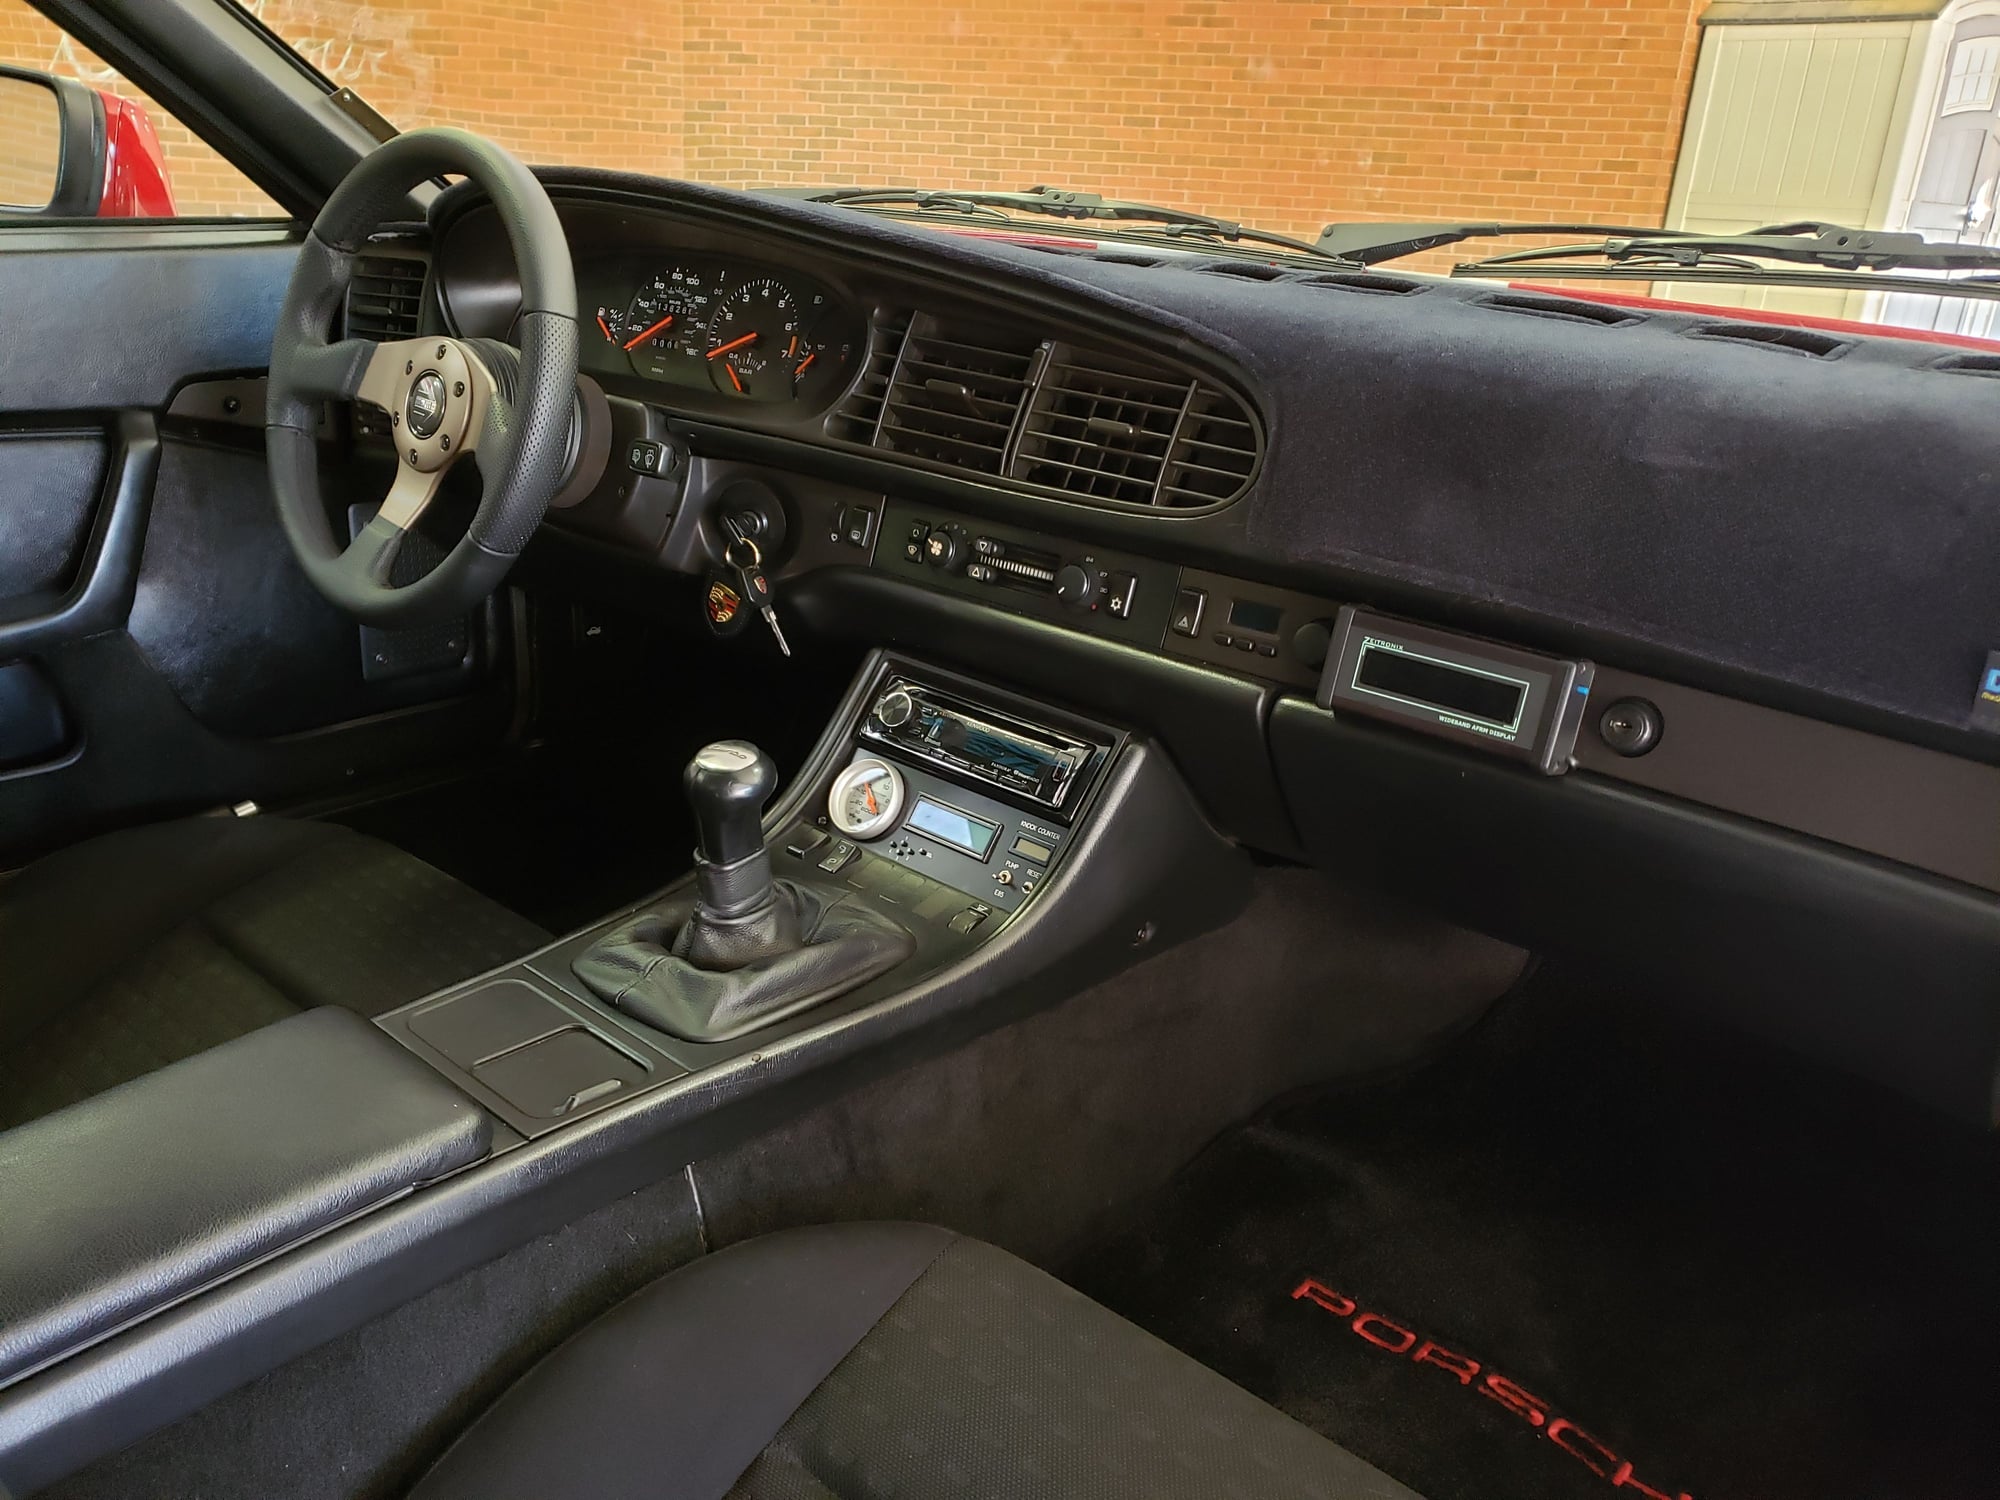 1986 Porsche 944 -  - Used - VIN WP0AA095XGN150162 - 138,000 Miles - 4 cyl - 2WD - Manual - Coupe - Red - Marietta, GA 30062, United States